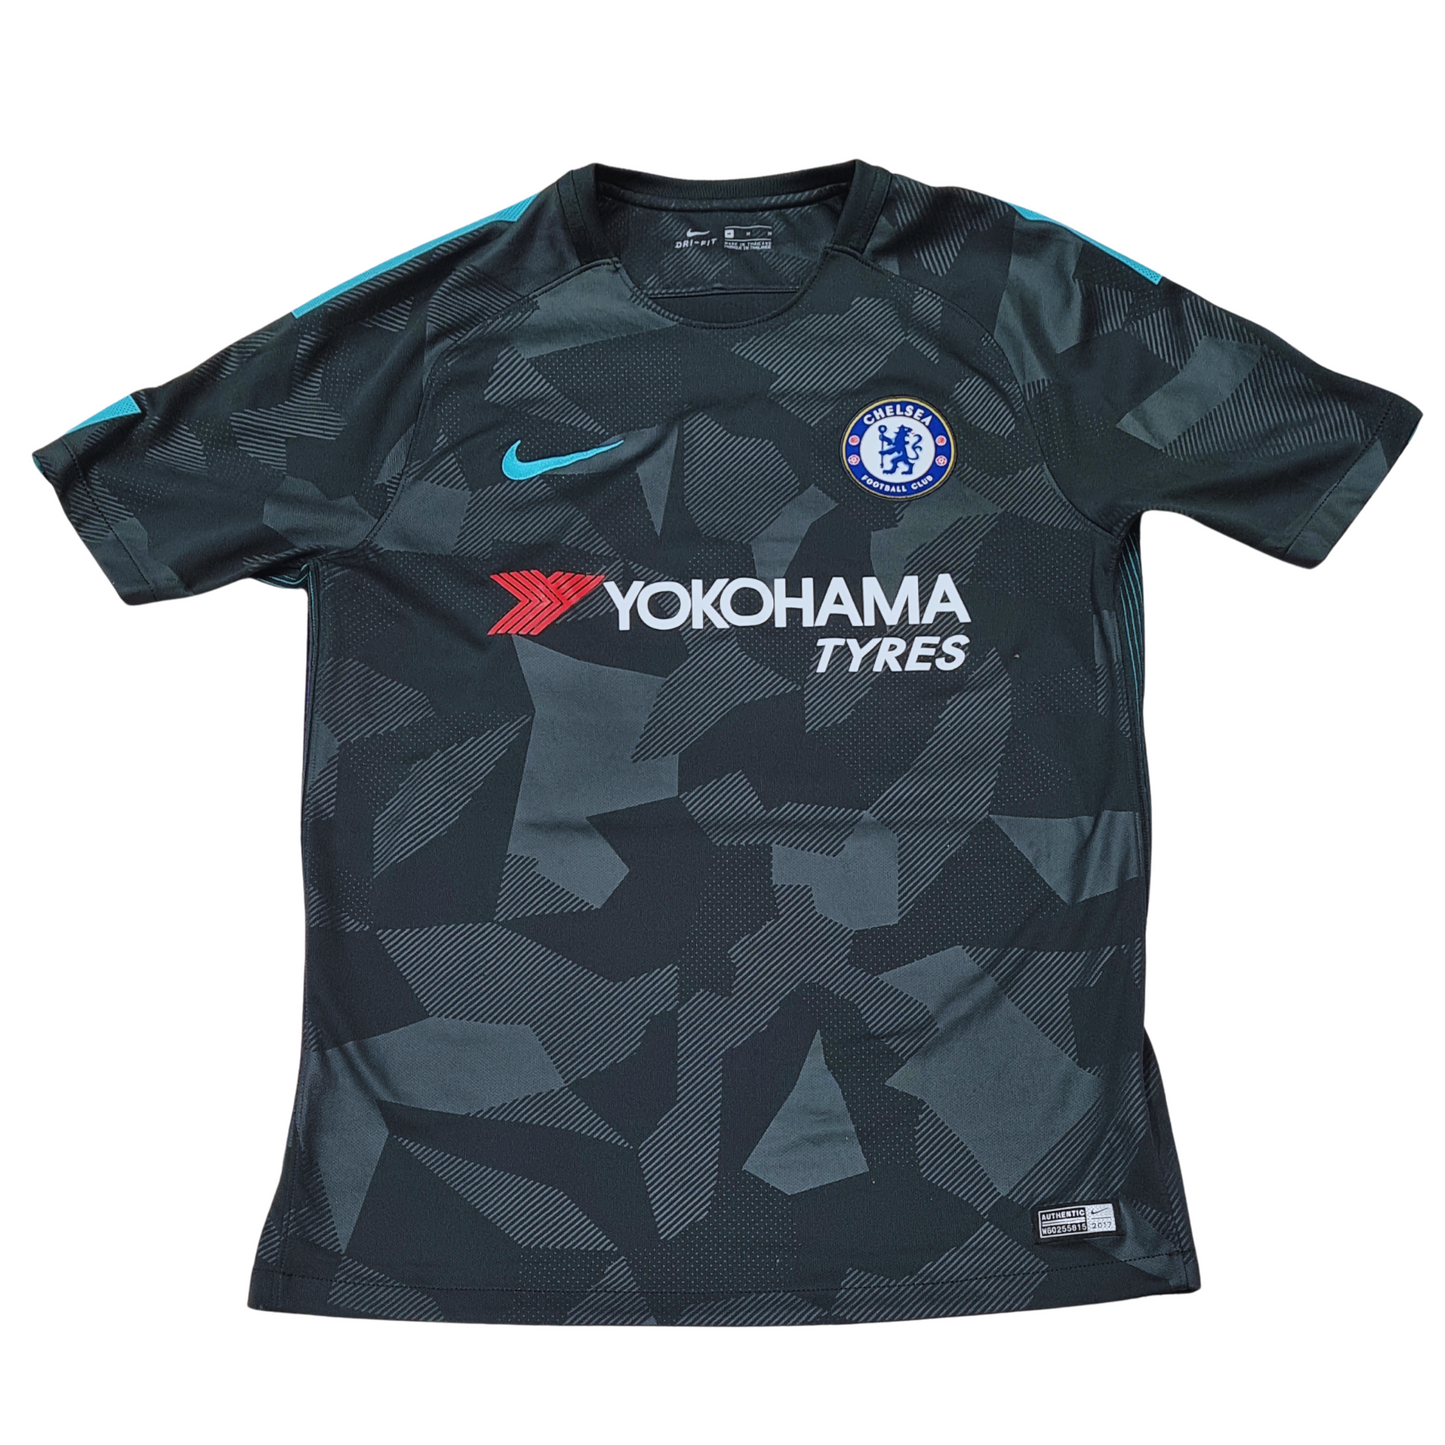 The Chelsea 2017/18 Third Jersey, designed by Nike for the 2017/18 season, showcases a unique blend of black and camouflage patterns.